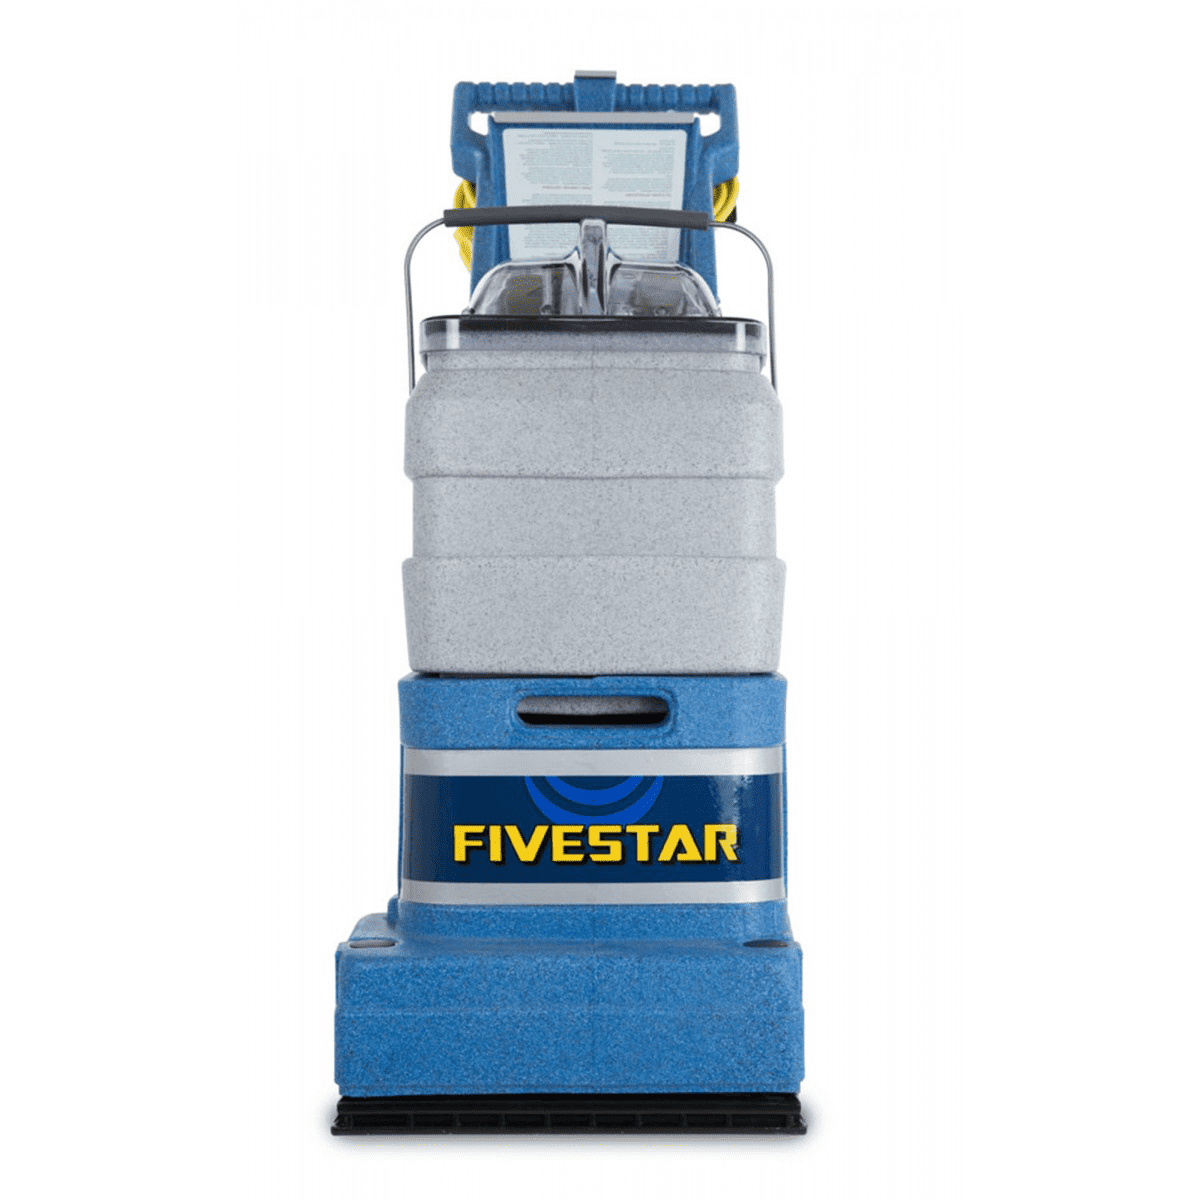 FiveStar, 3 gal Carpet Extractor The Custodian Commercial Sanitation & Industrial Maintenance Products